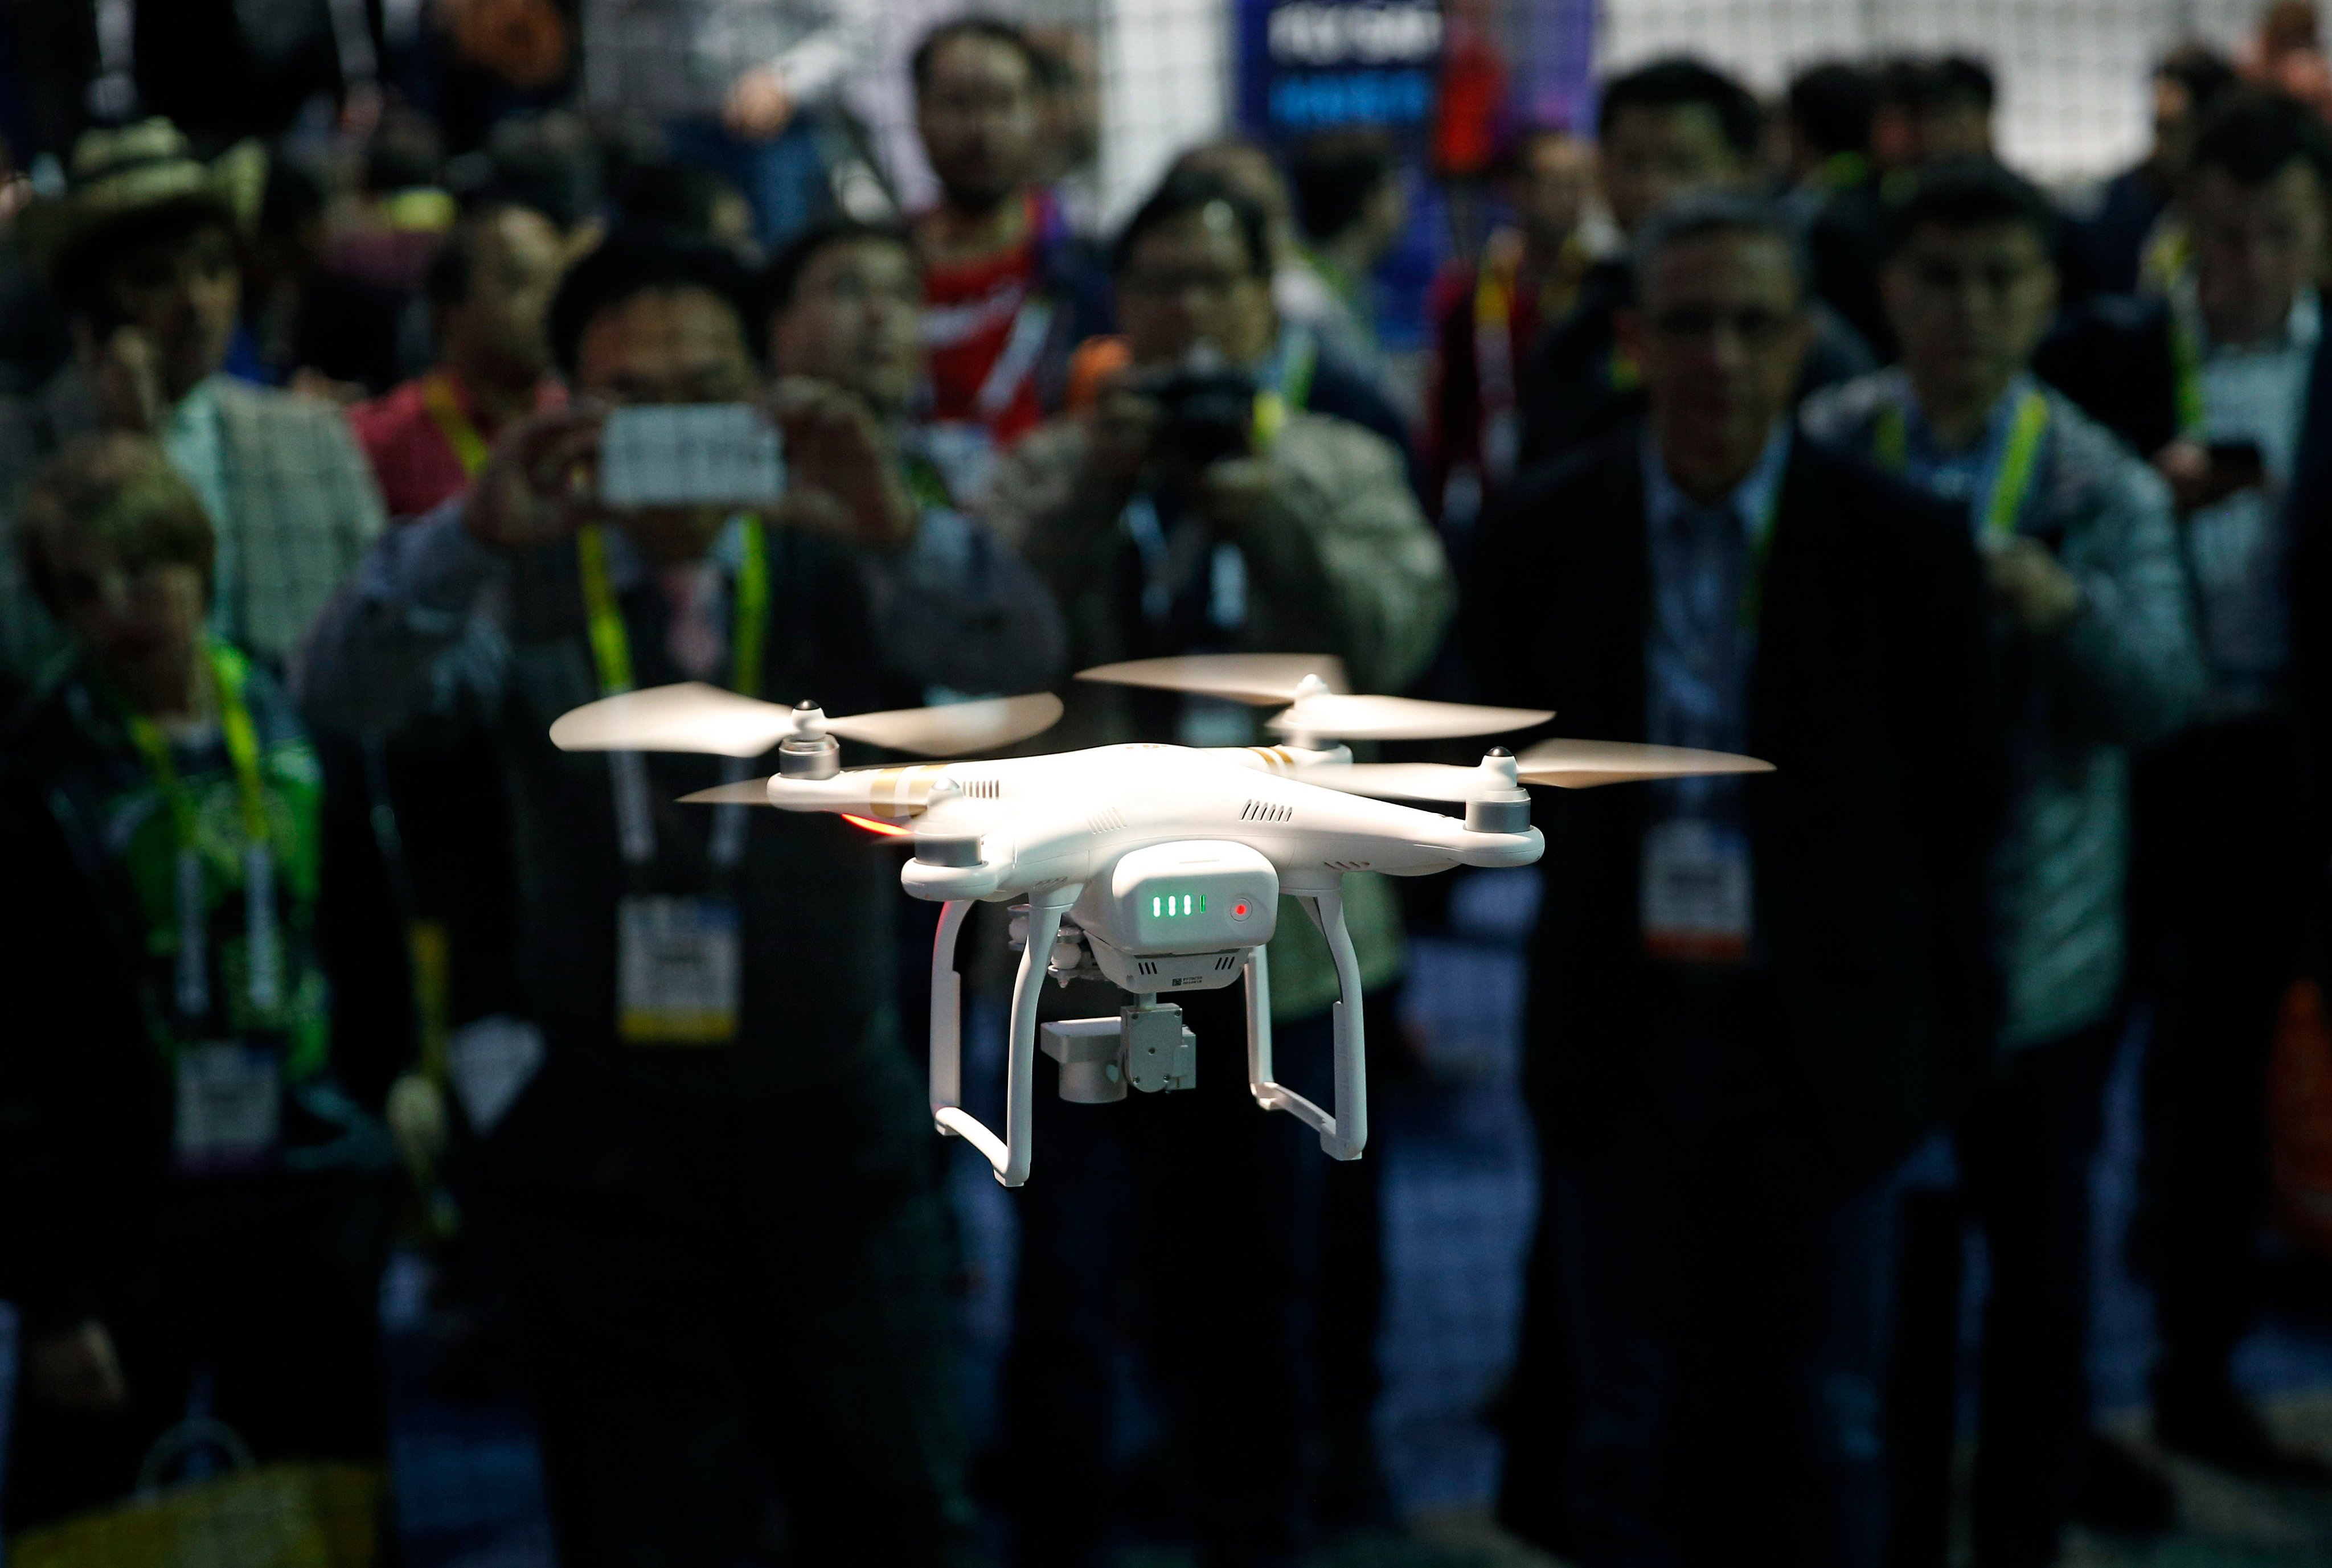 Low-altitude vehicles like drones are becoming a major market segment in China’s pursuit of tech advancement as well as economic growth. Photo: AP